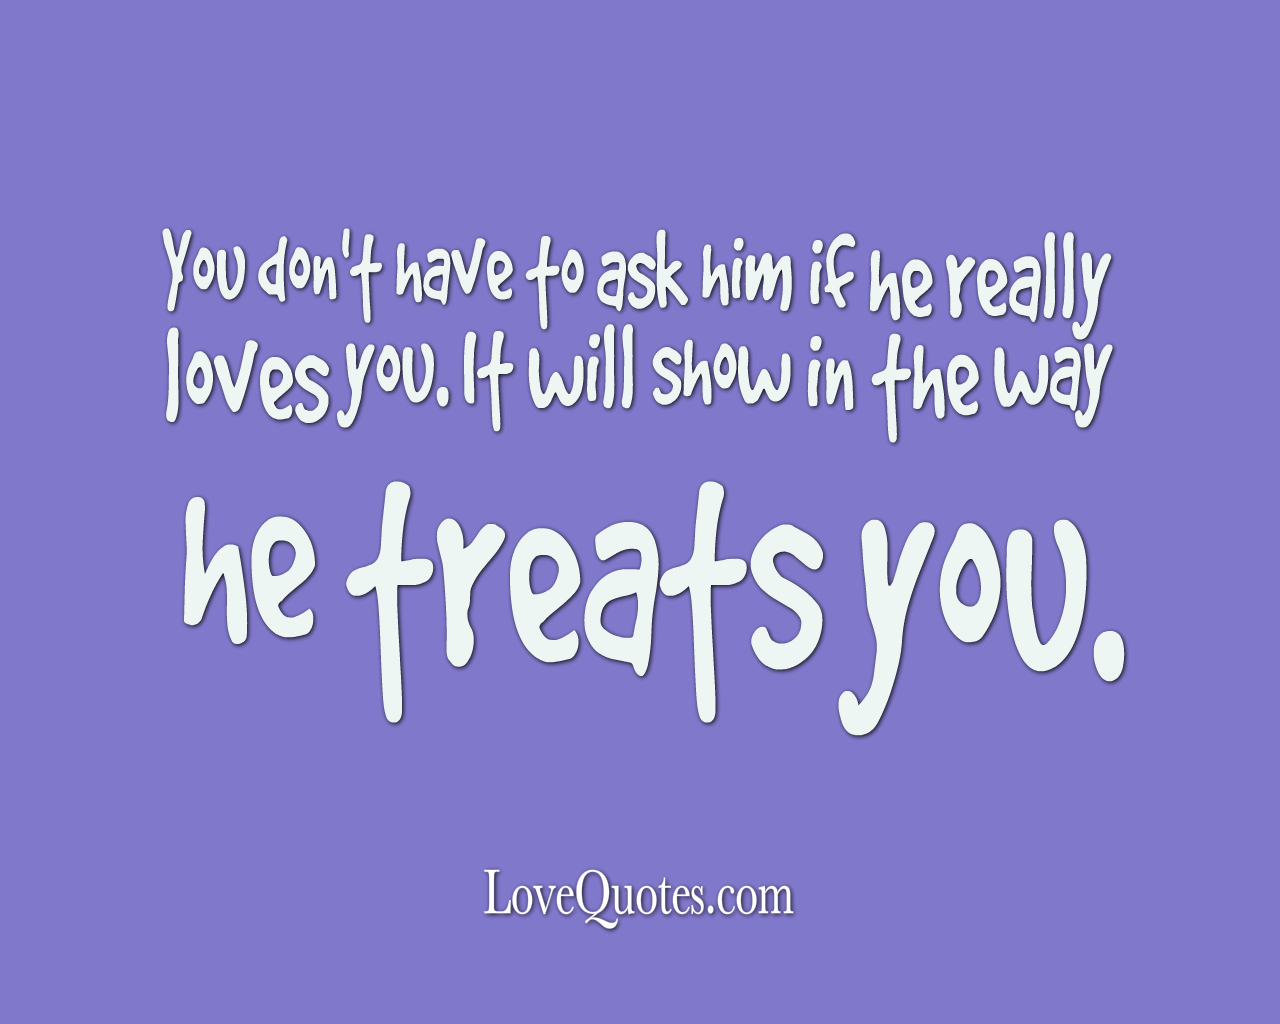 The Way He Treats You Love Quotes